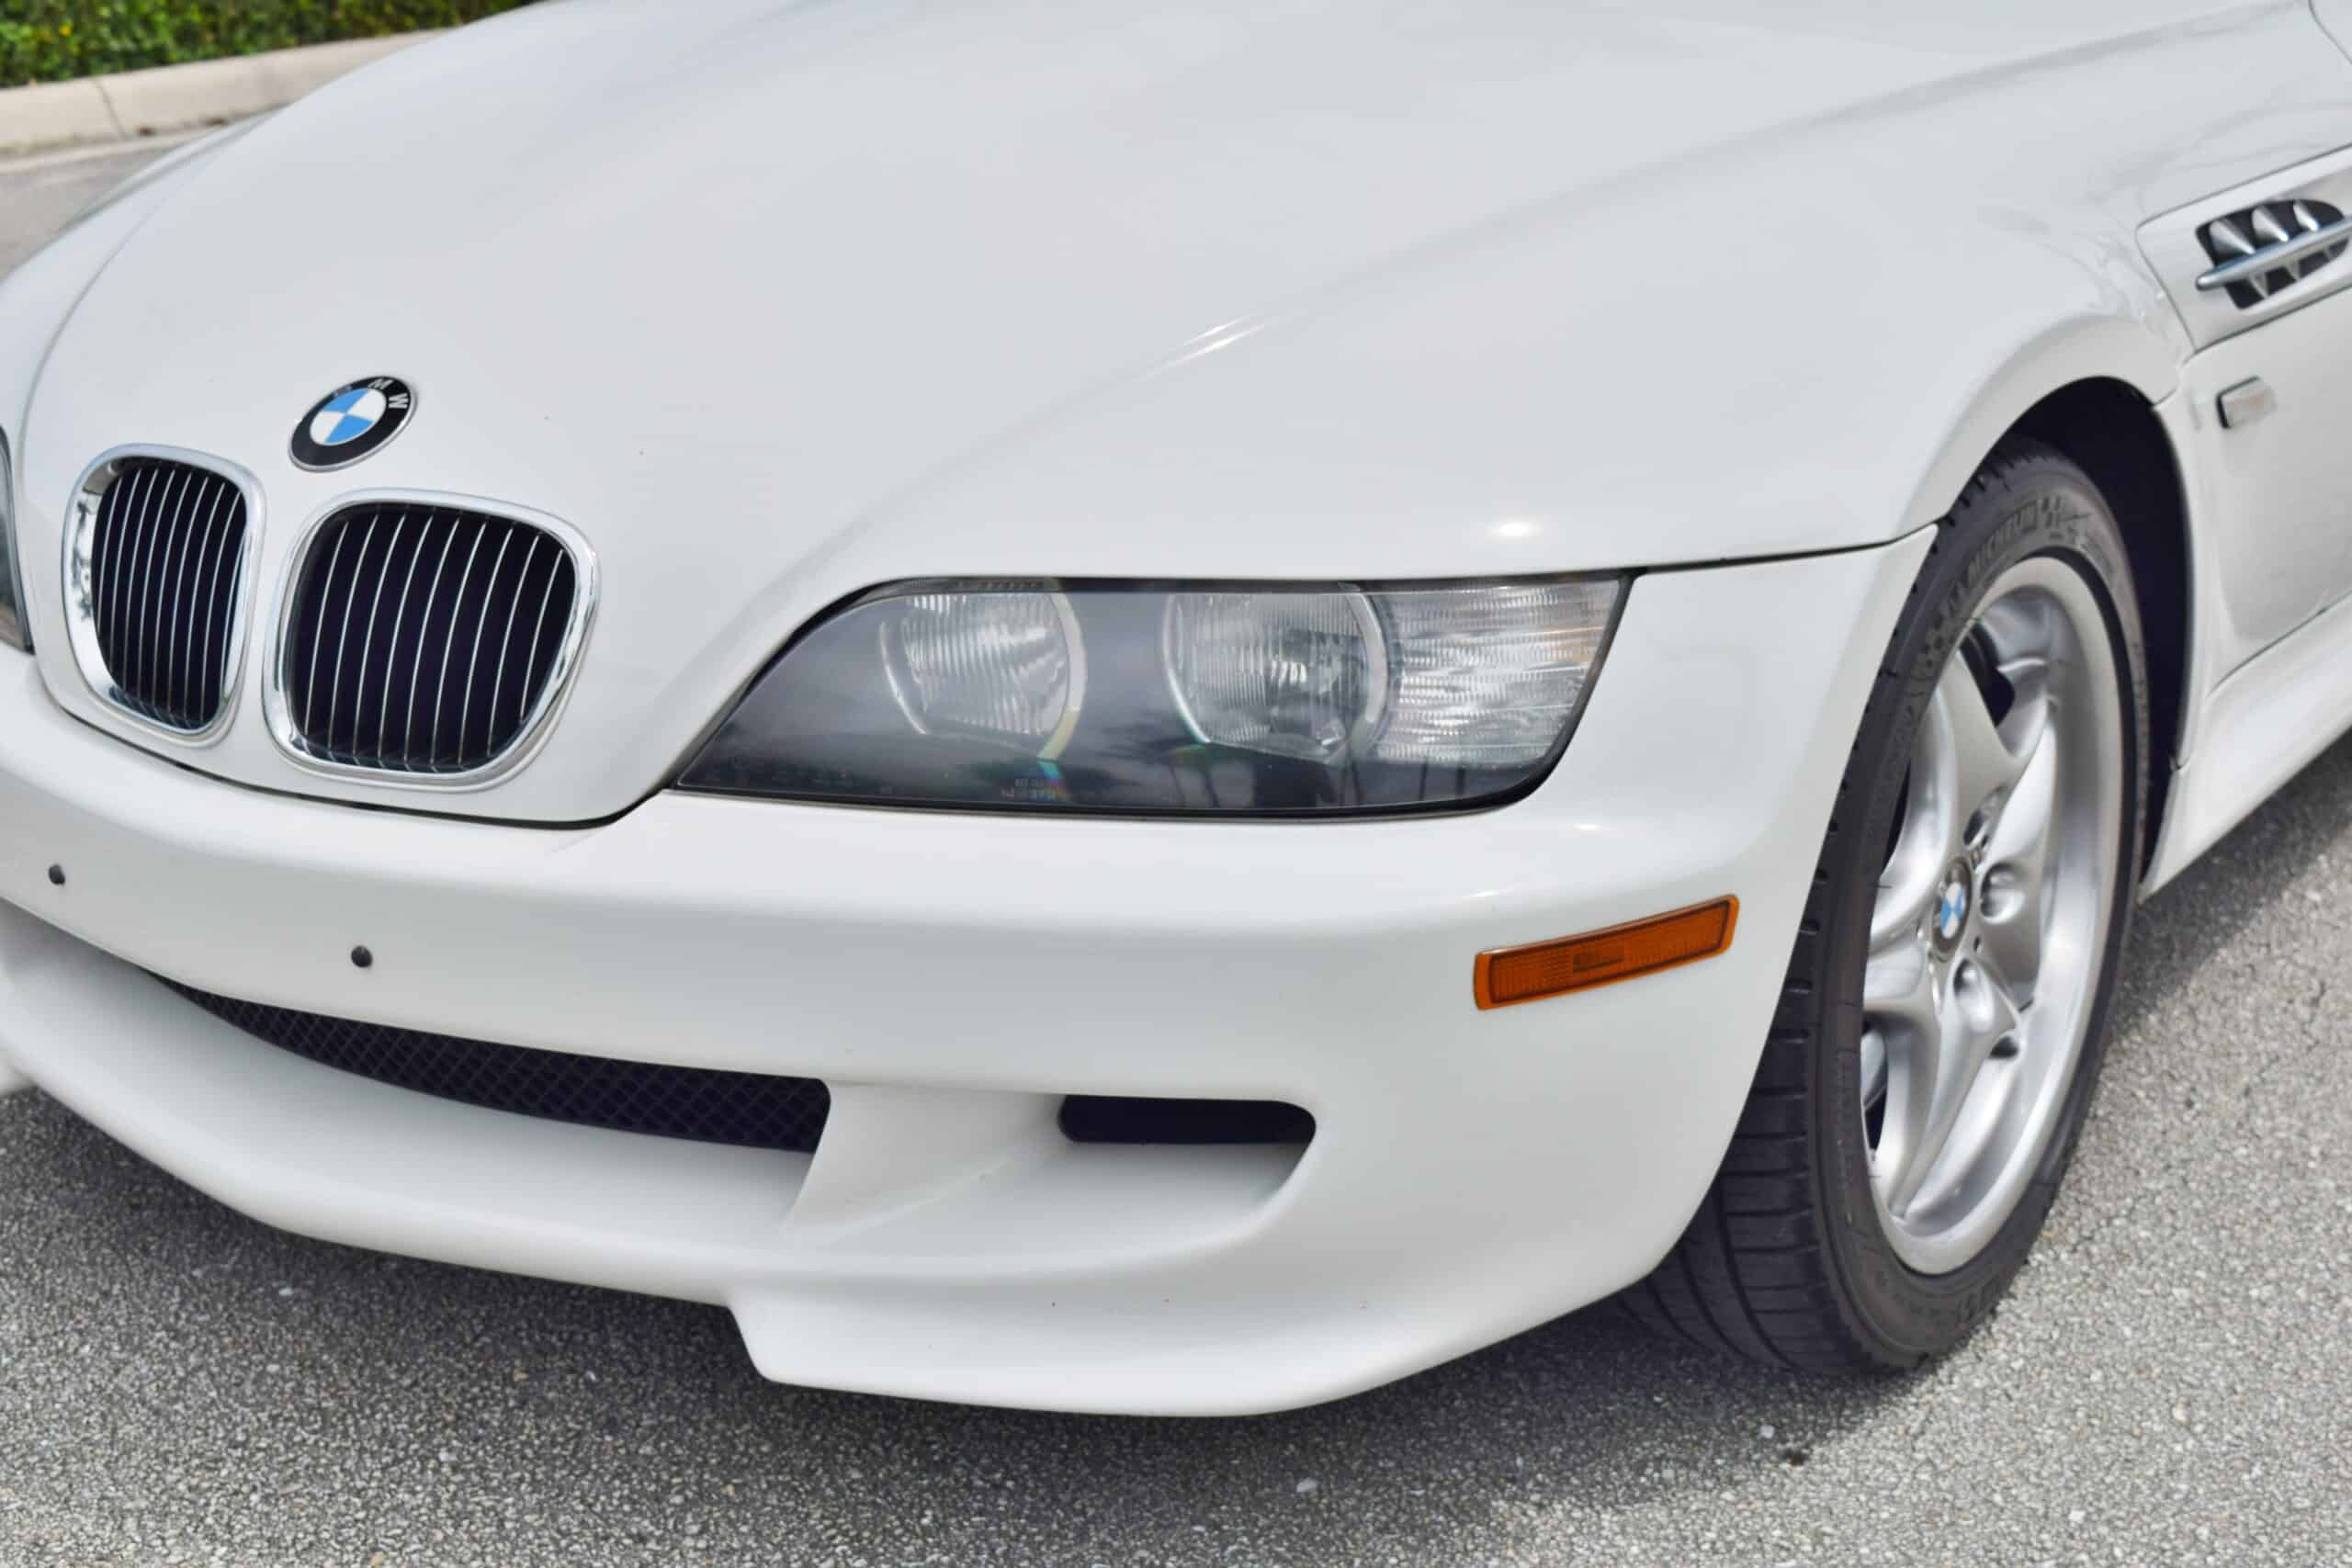 2002 BMW M Roadster & Coupe Last year Z3M Roadster 2 Owner- Only 40K miles – Rare White/Red color combination- 4 Keys-Books/Manuals